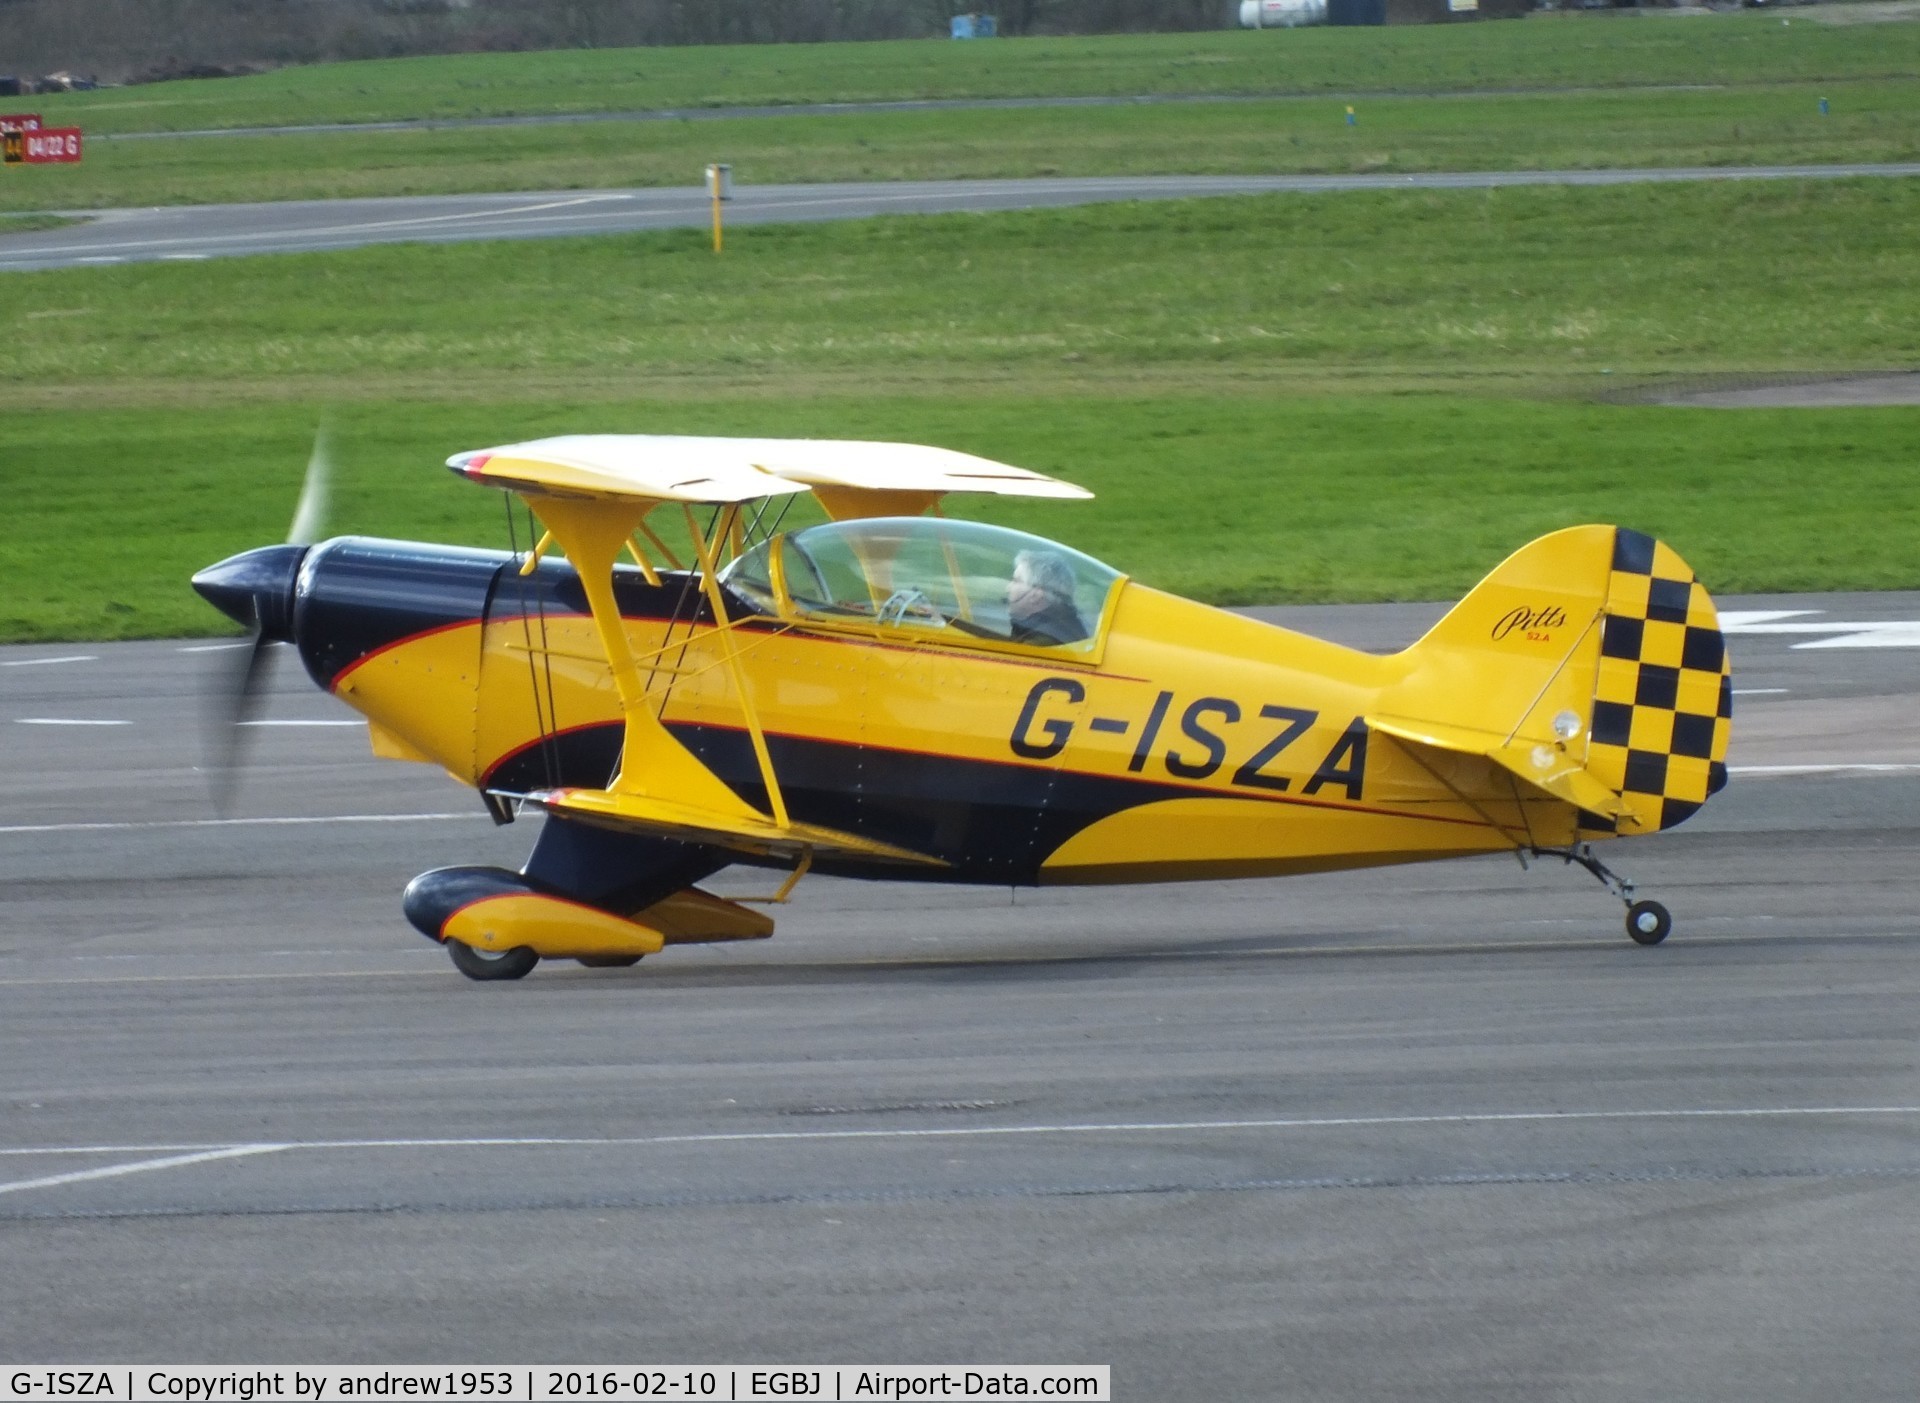 G-ISZA, 1977 Aerotek Pitts S-2A Special C/N 2137, G-ISZA at Gloucestershire Airport.